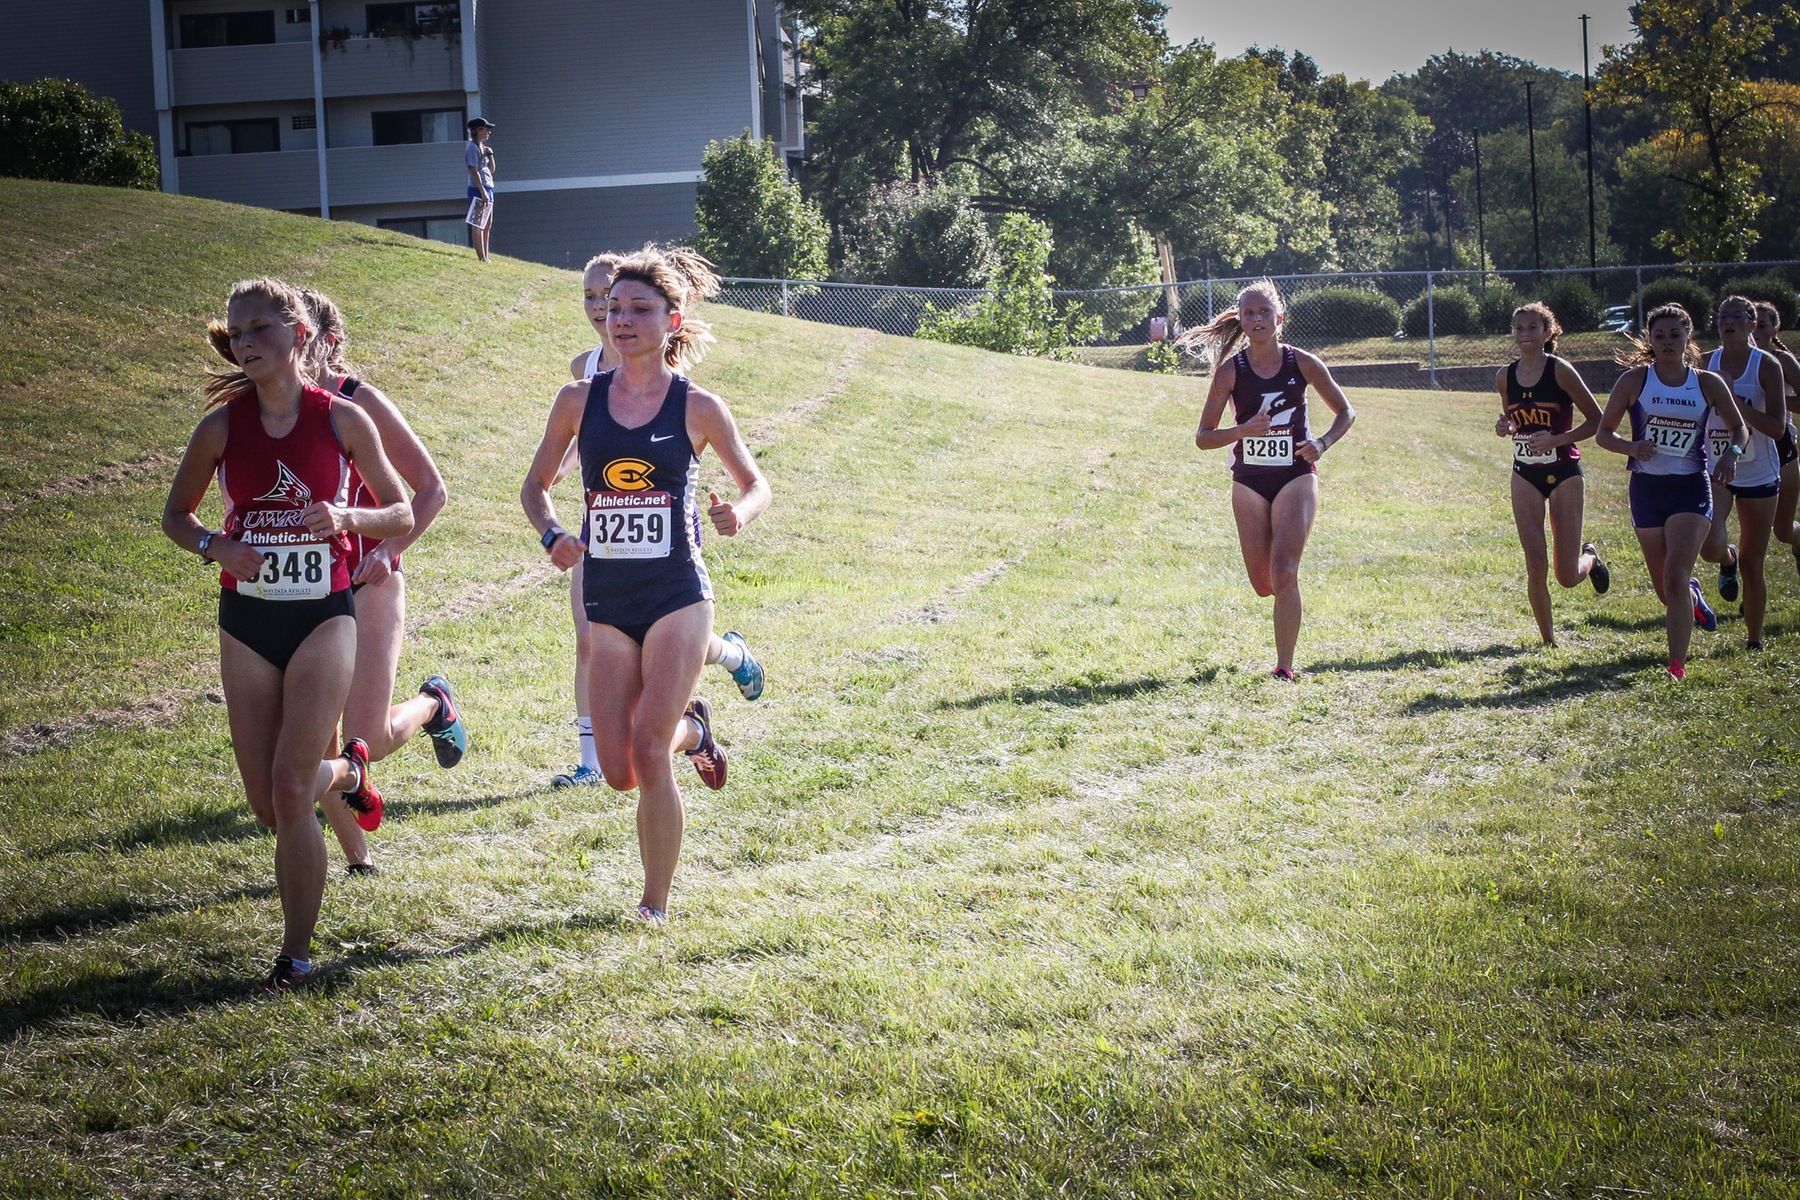 Slattery wins Augsburg Invite, Blugolds finish 5th overall